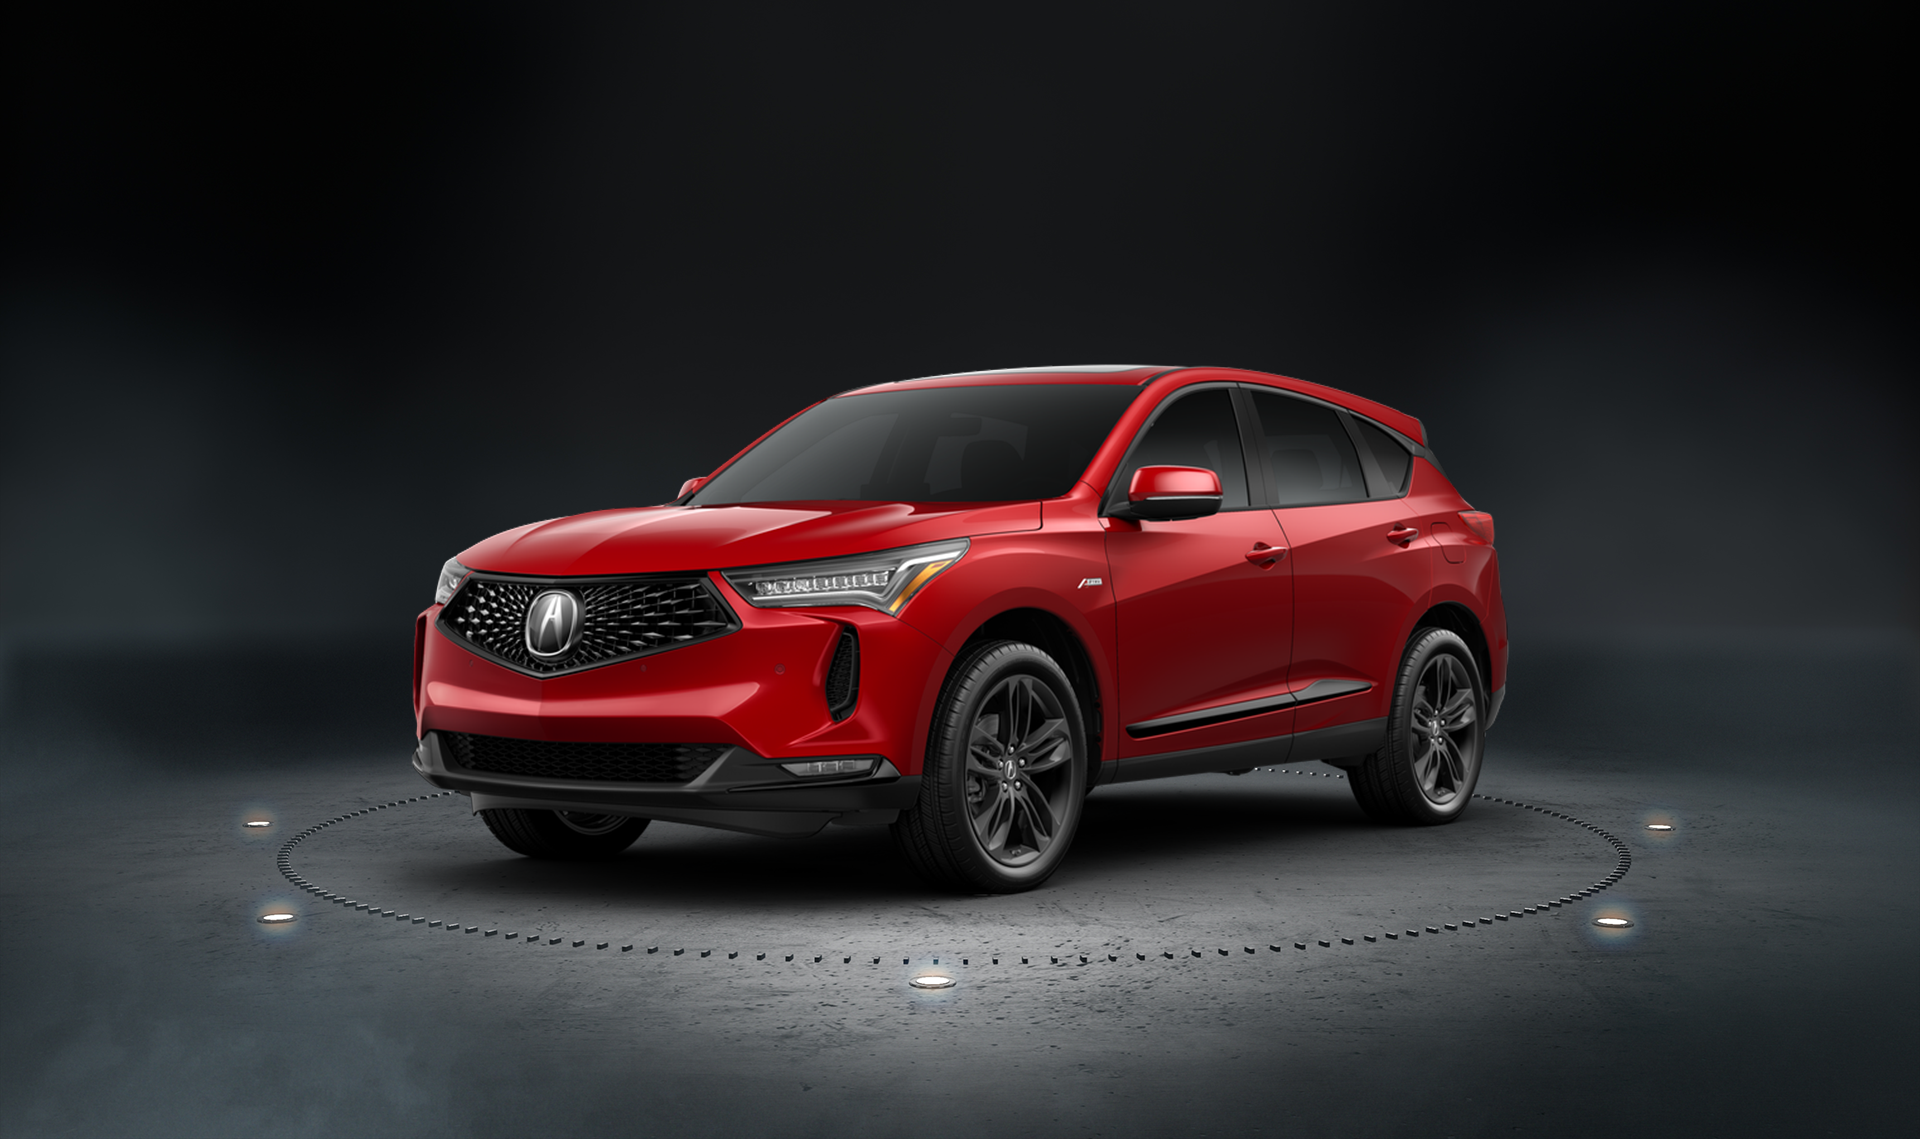 Red Acura Rdx Photos, Download The BEST Free Red Acura Rdx Stock Photos &  HD Images